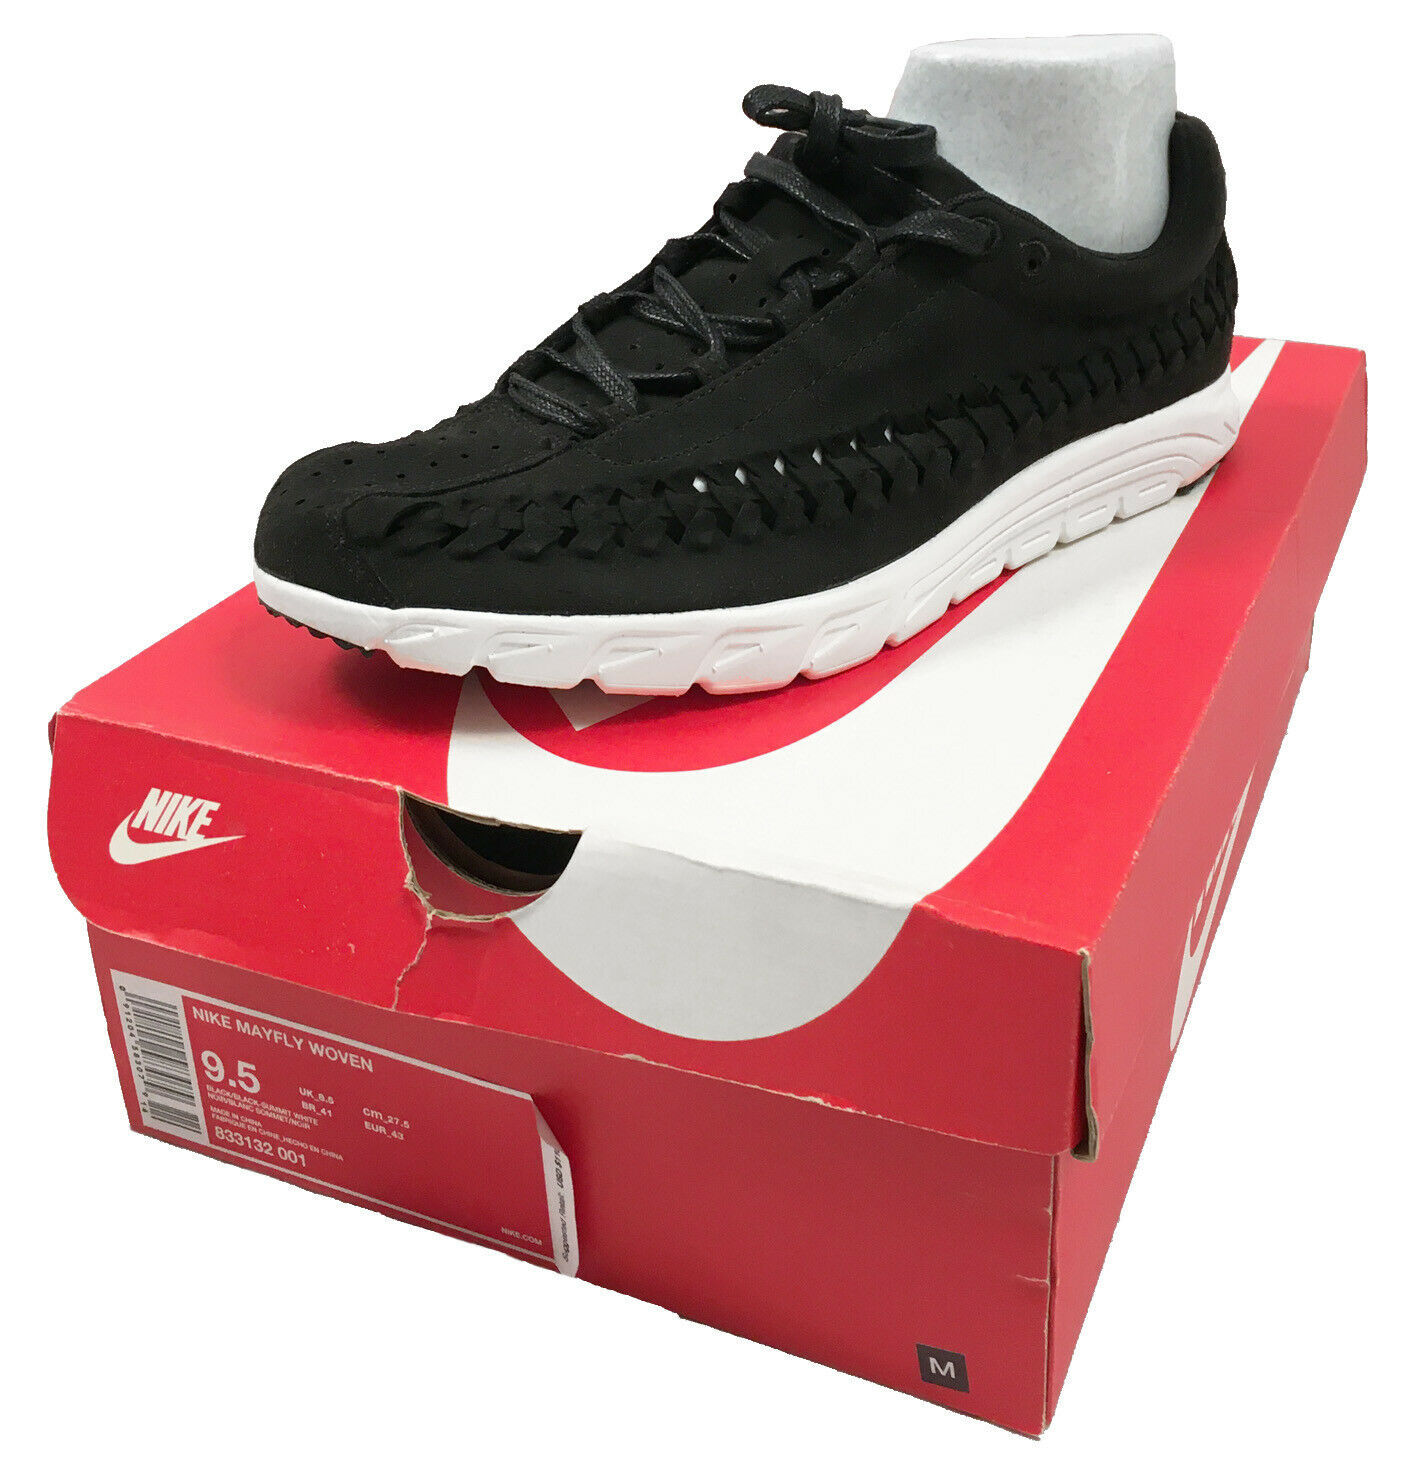 NEW Nike Mayfly Woven Sneakers!   Black   Woven Suede Upper   Very Lightweight - $59.99